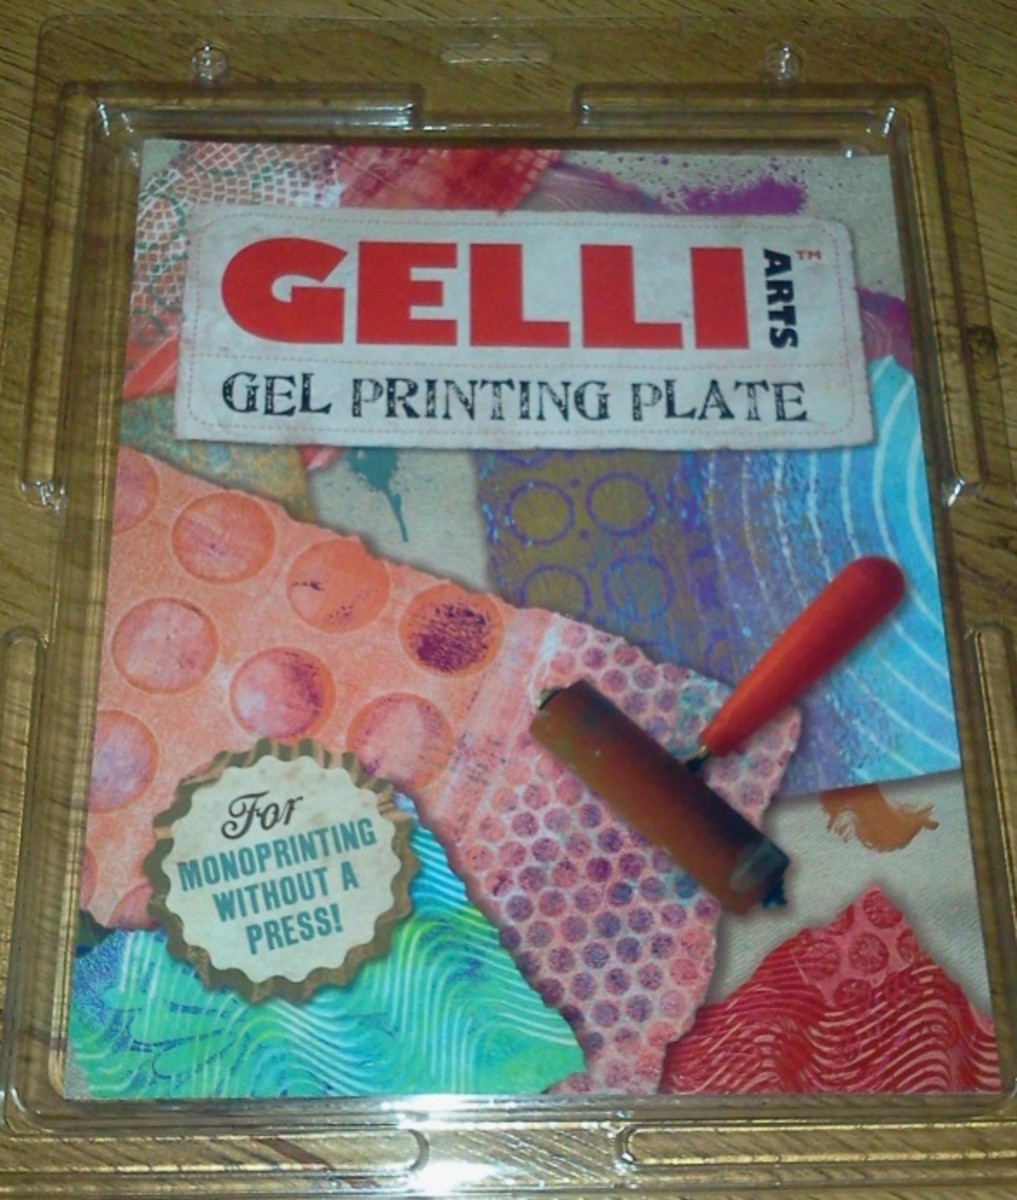  Gelli Arts Gel Printing Plate - 8 X 10 Gel Plate, Reusable Gel  Printing Plate, Printmaking Gelli Plate for Art, Clear Gel Monoprinting  Plate, Gel Plate Printing for Arts and Crafts